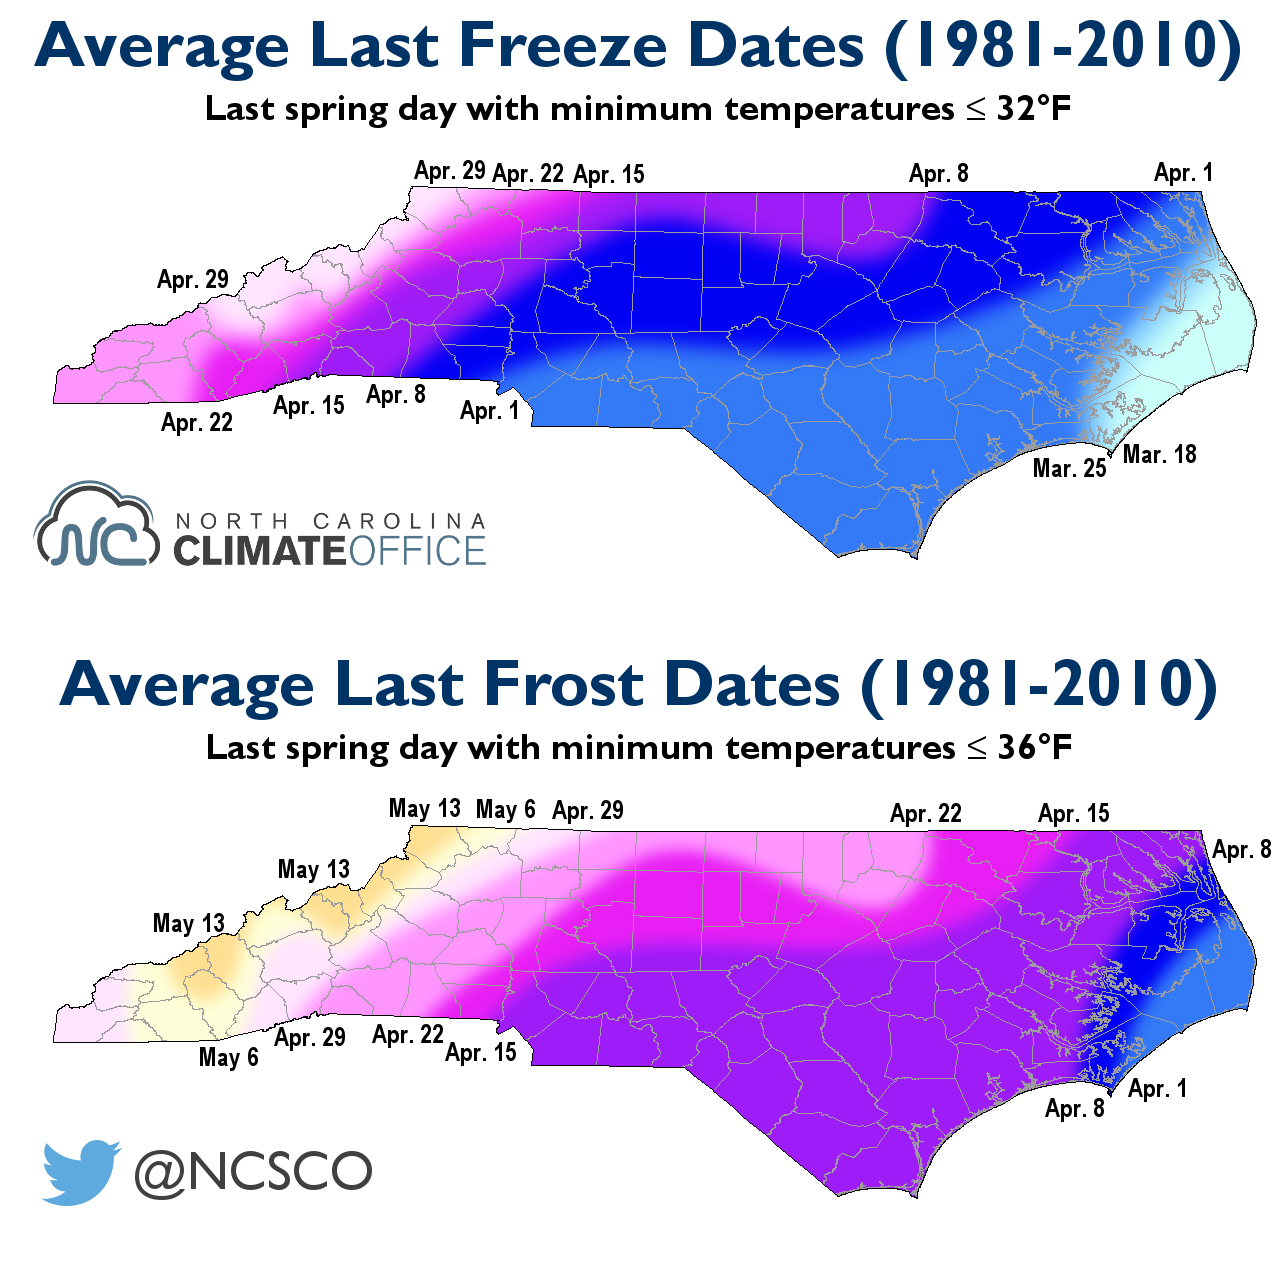 March Warmed Up and Dried Out Across NC North Carolina Climate Office